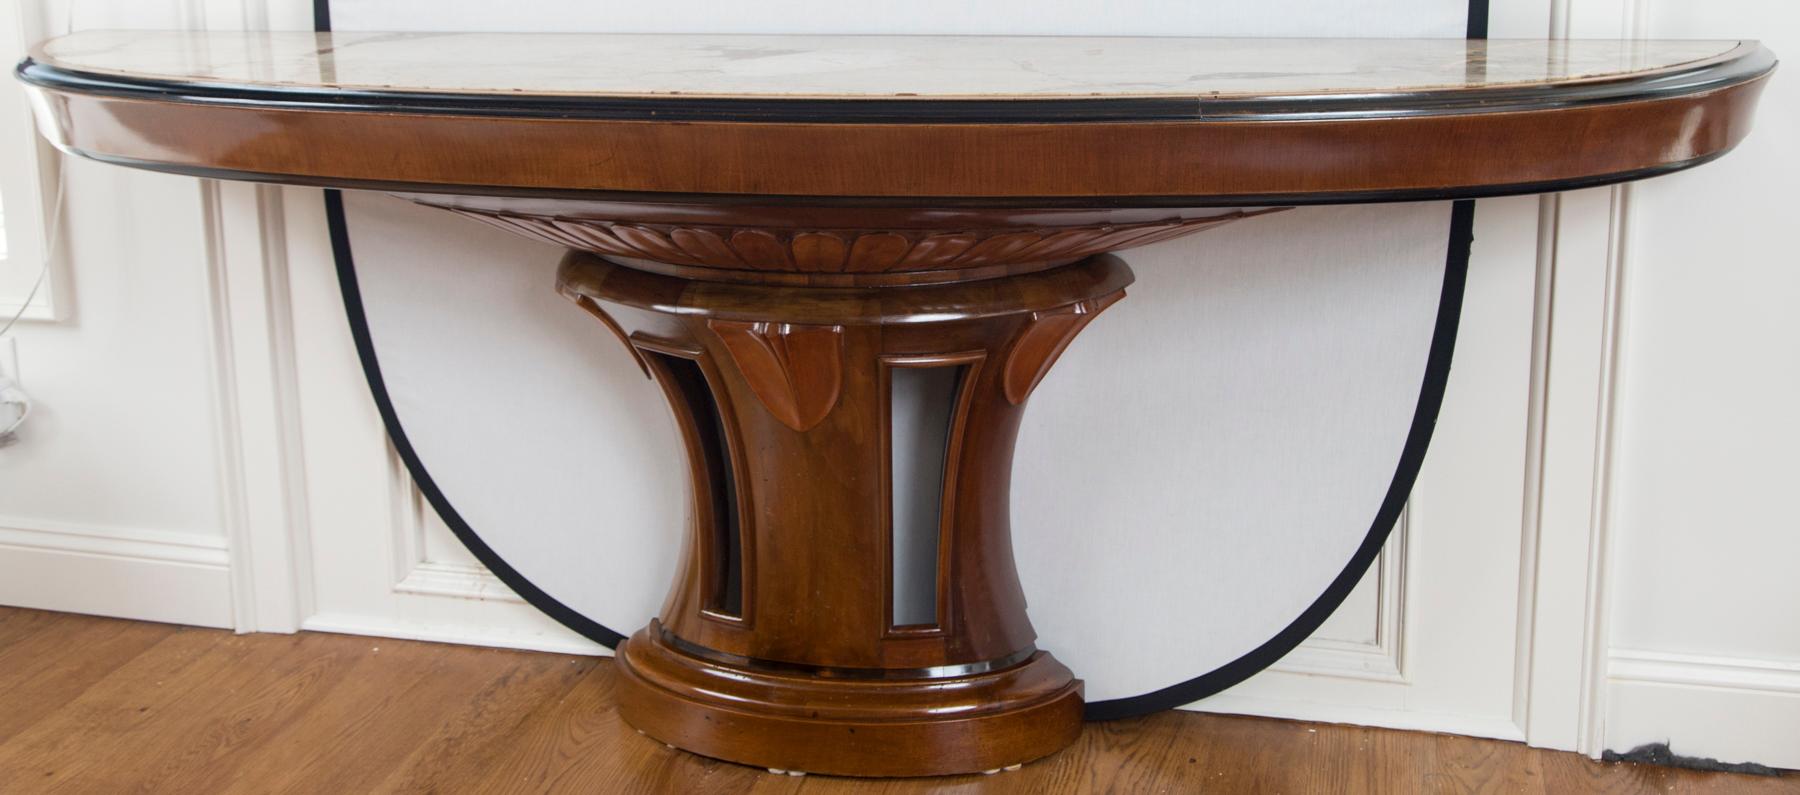 Wonderful and long demilune-shaped console table with an inset marble top resting on a pedestal base in solid walnut with stunning leaf carvings.  The base is  in solid walnut and is shown with  its original and breathtaking  marble top in beige